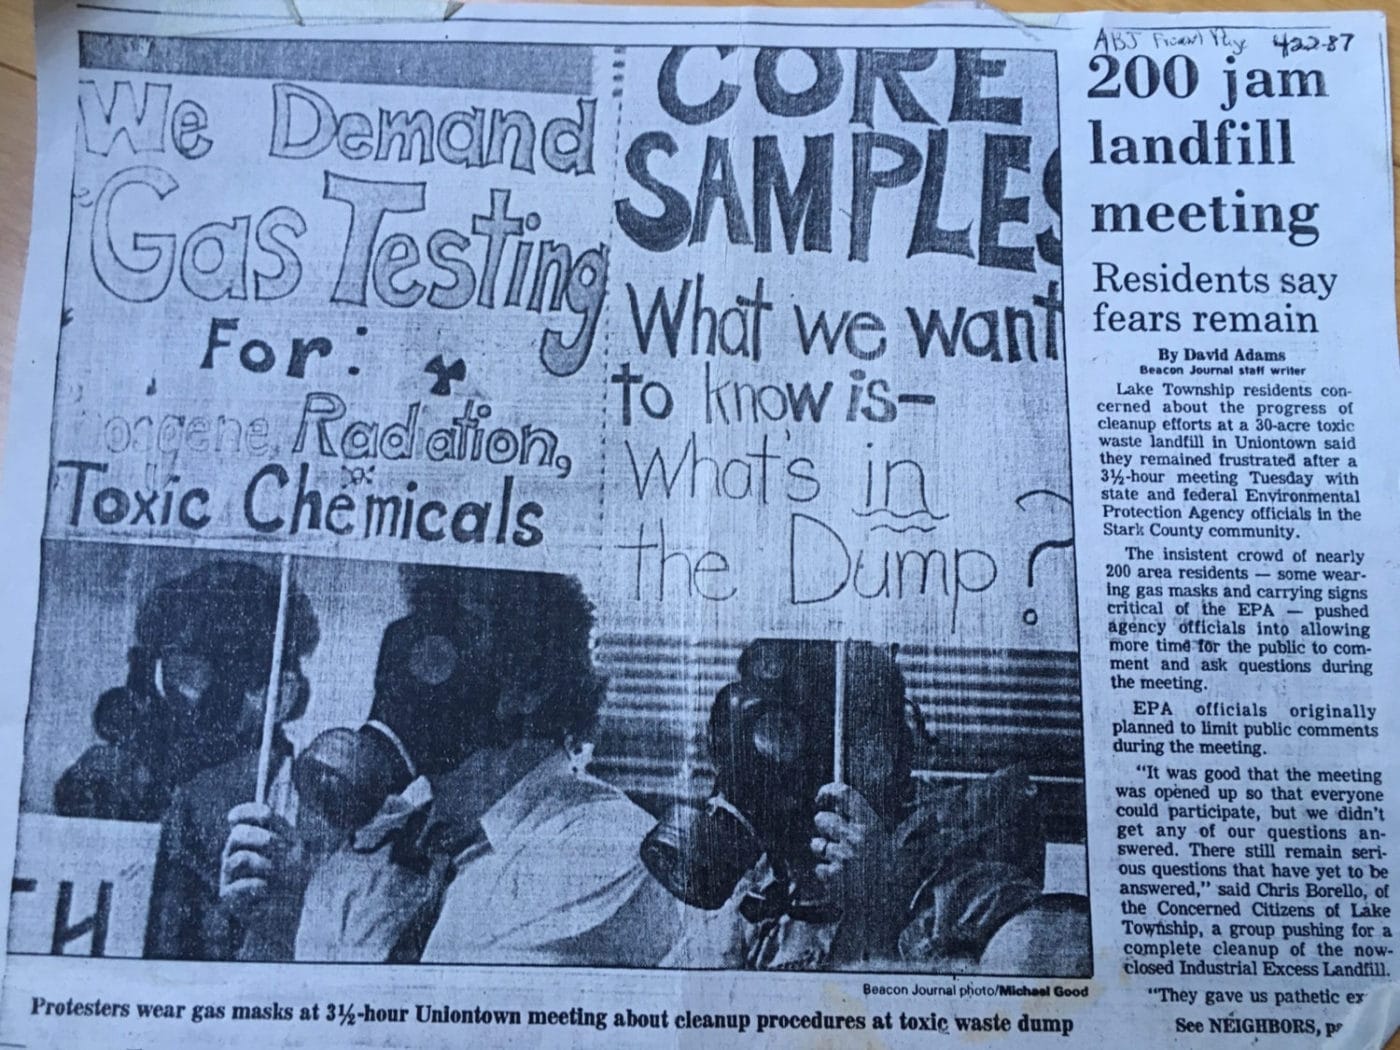 Gas-masked-protesters-against-Industrial-Excess-Landfill-in-Akron-Beacon-Journal-1987-story-1400x1050, 2020 hindsight brings corrupted radiation testing into focus at the EPA – Part 1, News & Views 